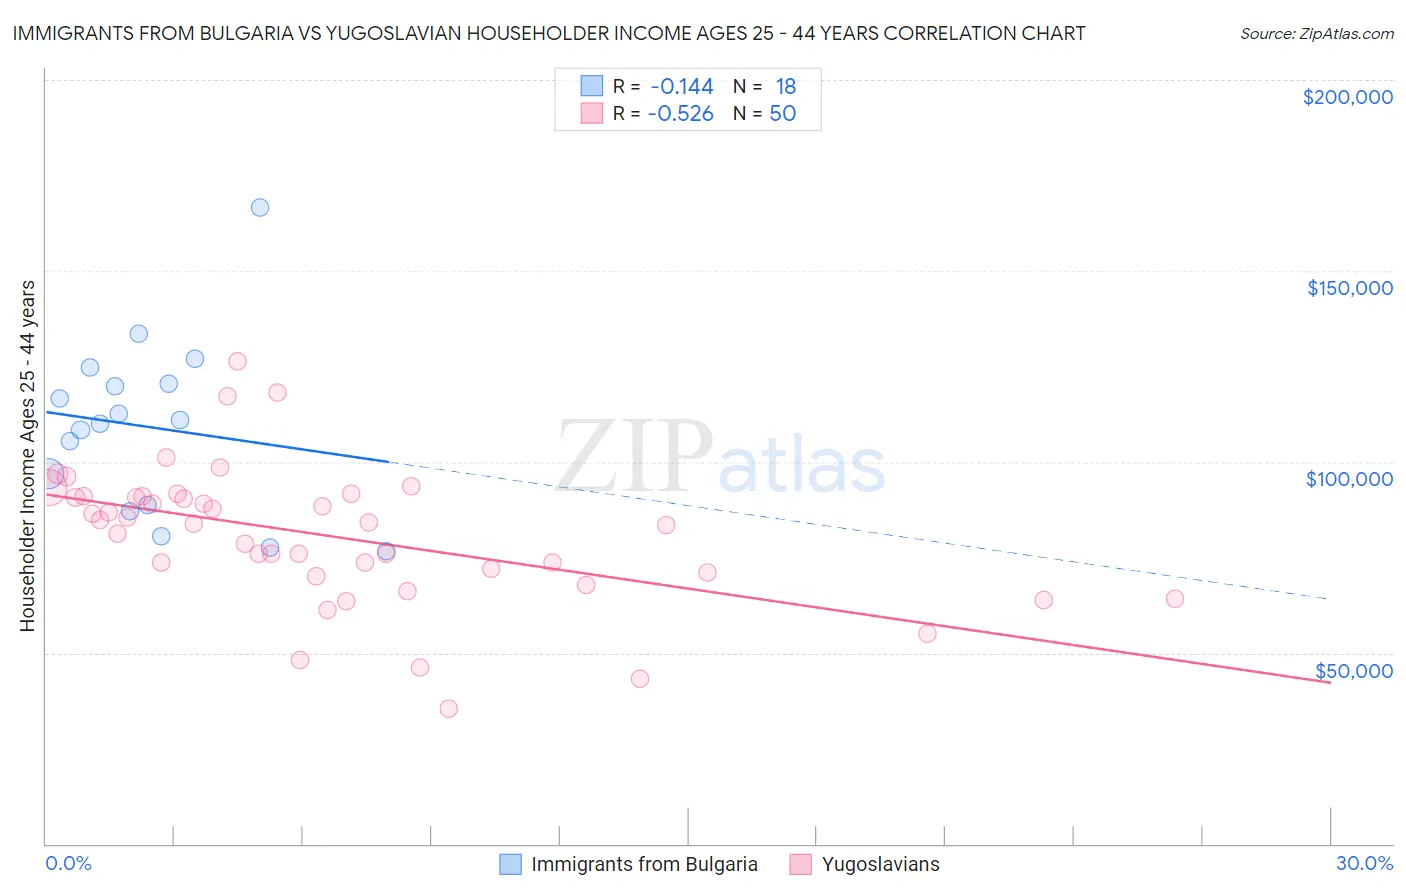 Immigrants from Bulgaria vs Yugoslavian Householder Income Ages 25 - 44 years